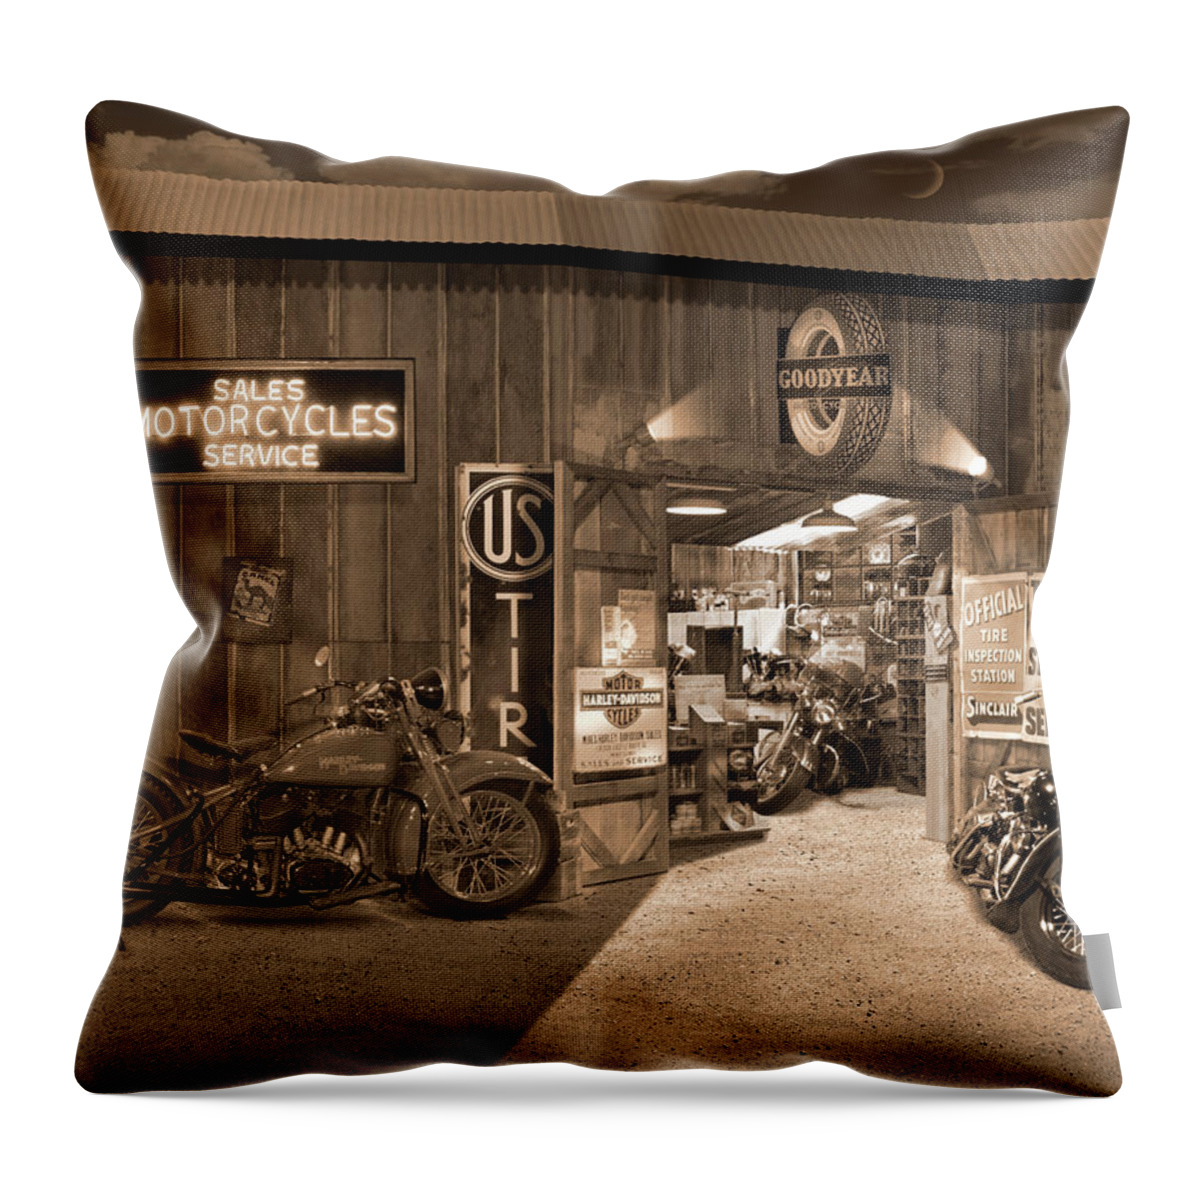 Motorcycle Throw Pillow featuring the photograph Outside The Old Motorcycle Shop - Spia by Mike McGlothlen